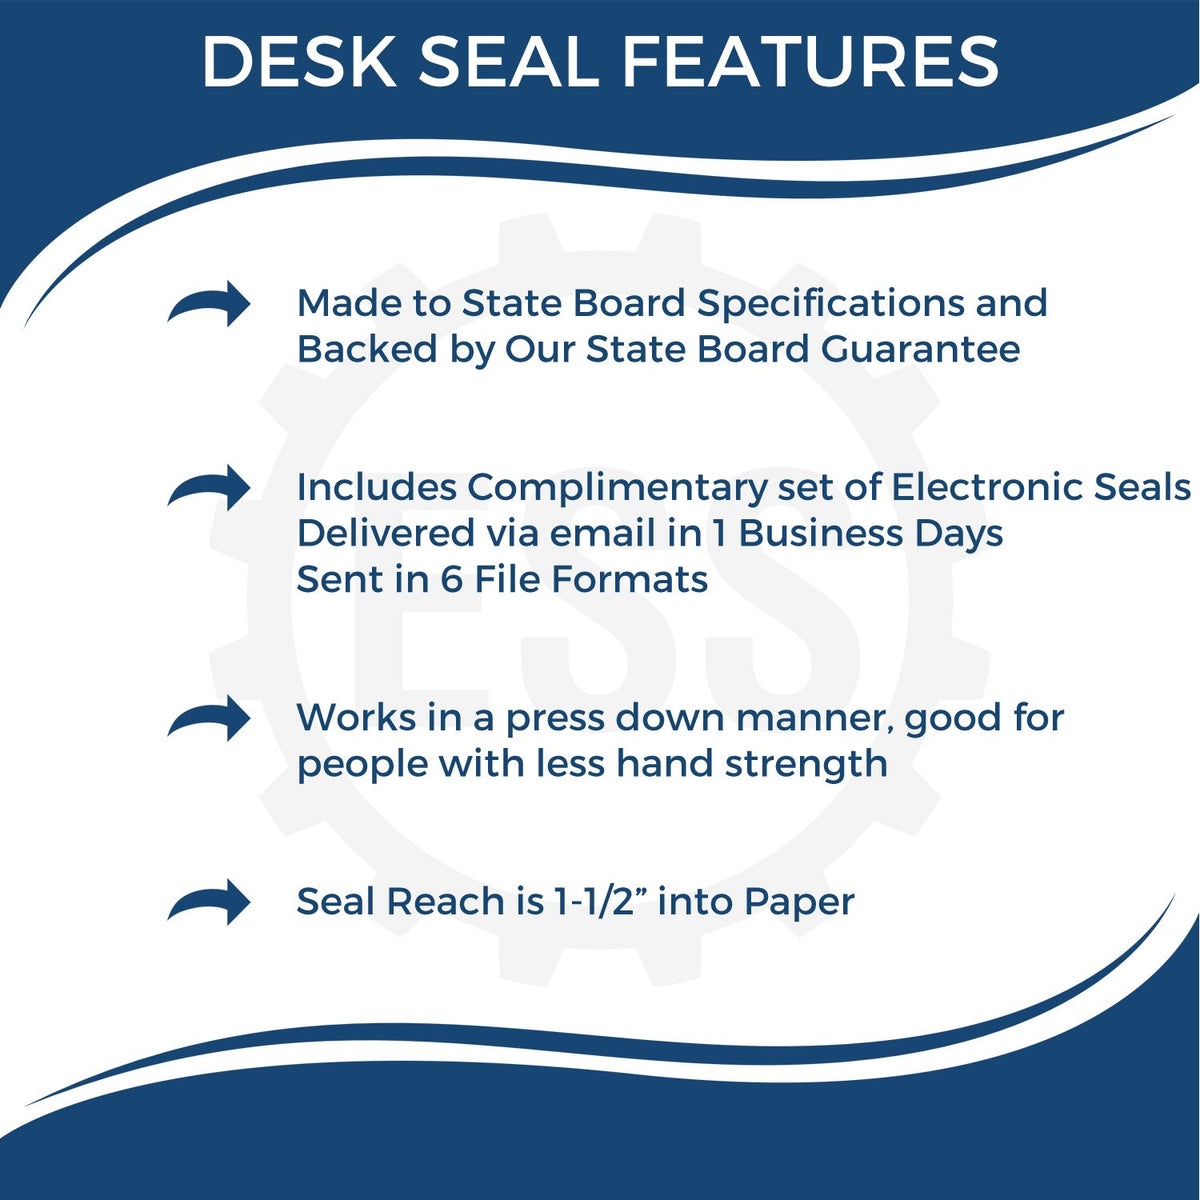 A picture of an infographic highlighting the selling points for the New Jersey Engineer Desk Seal